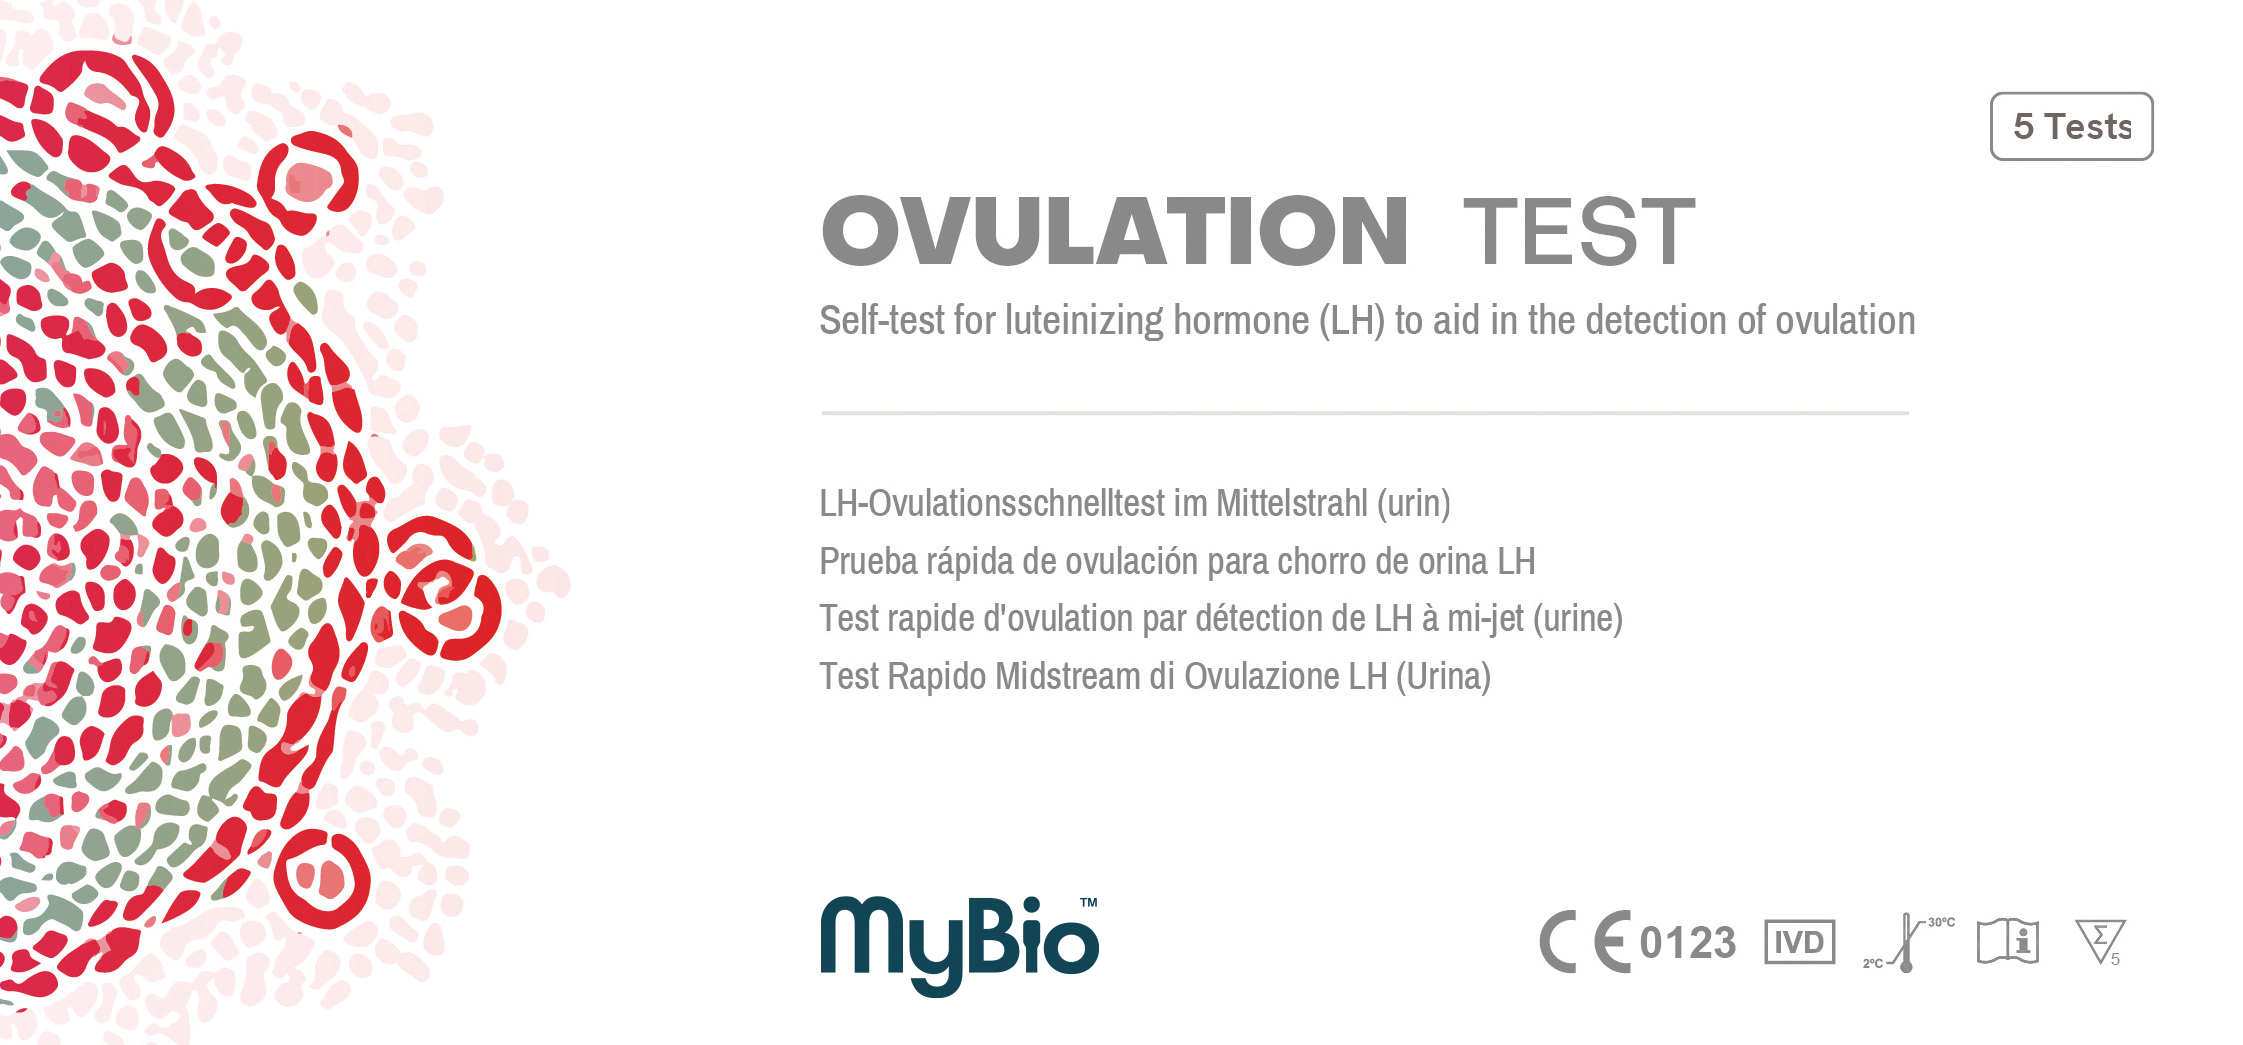 MyBio At Home Ovulation Self Test (5 Tests) image cover